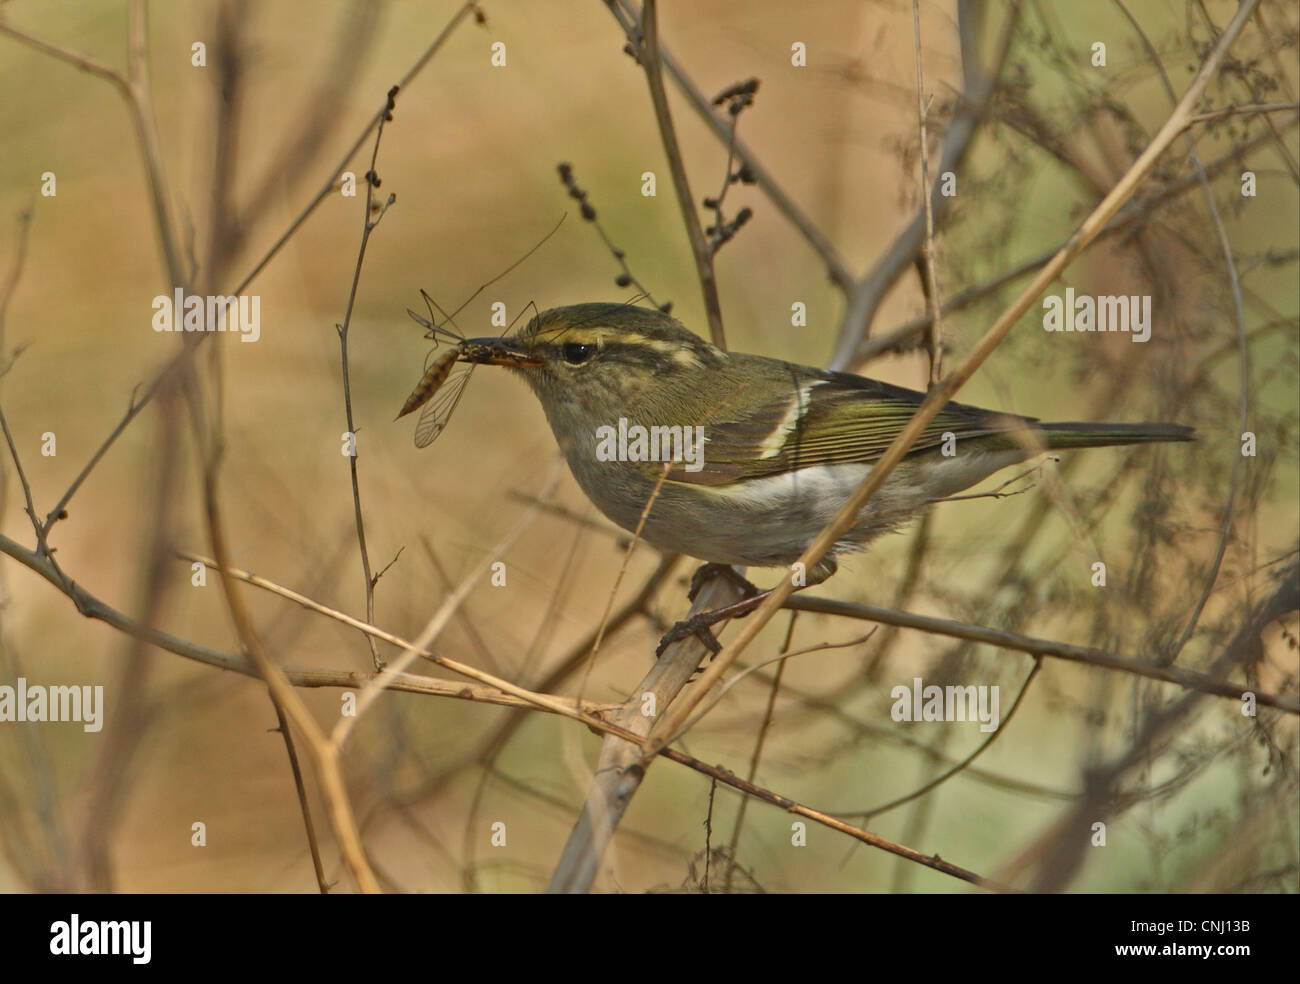 Pallas's Warbler (Phylloscopus proregulus) adult, with cranefly prey in beak, perched on stem, Hebei, China, may Stock Photo